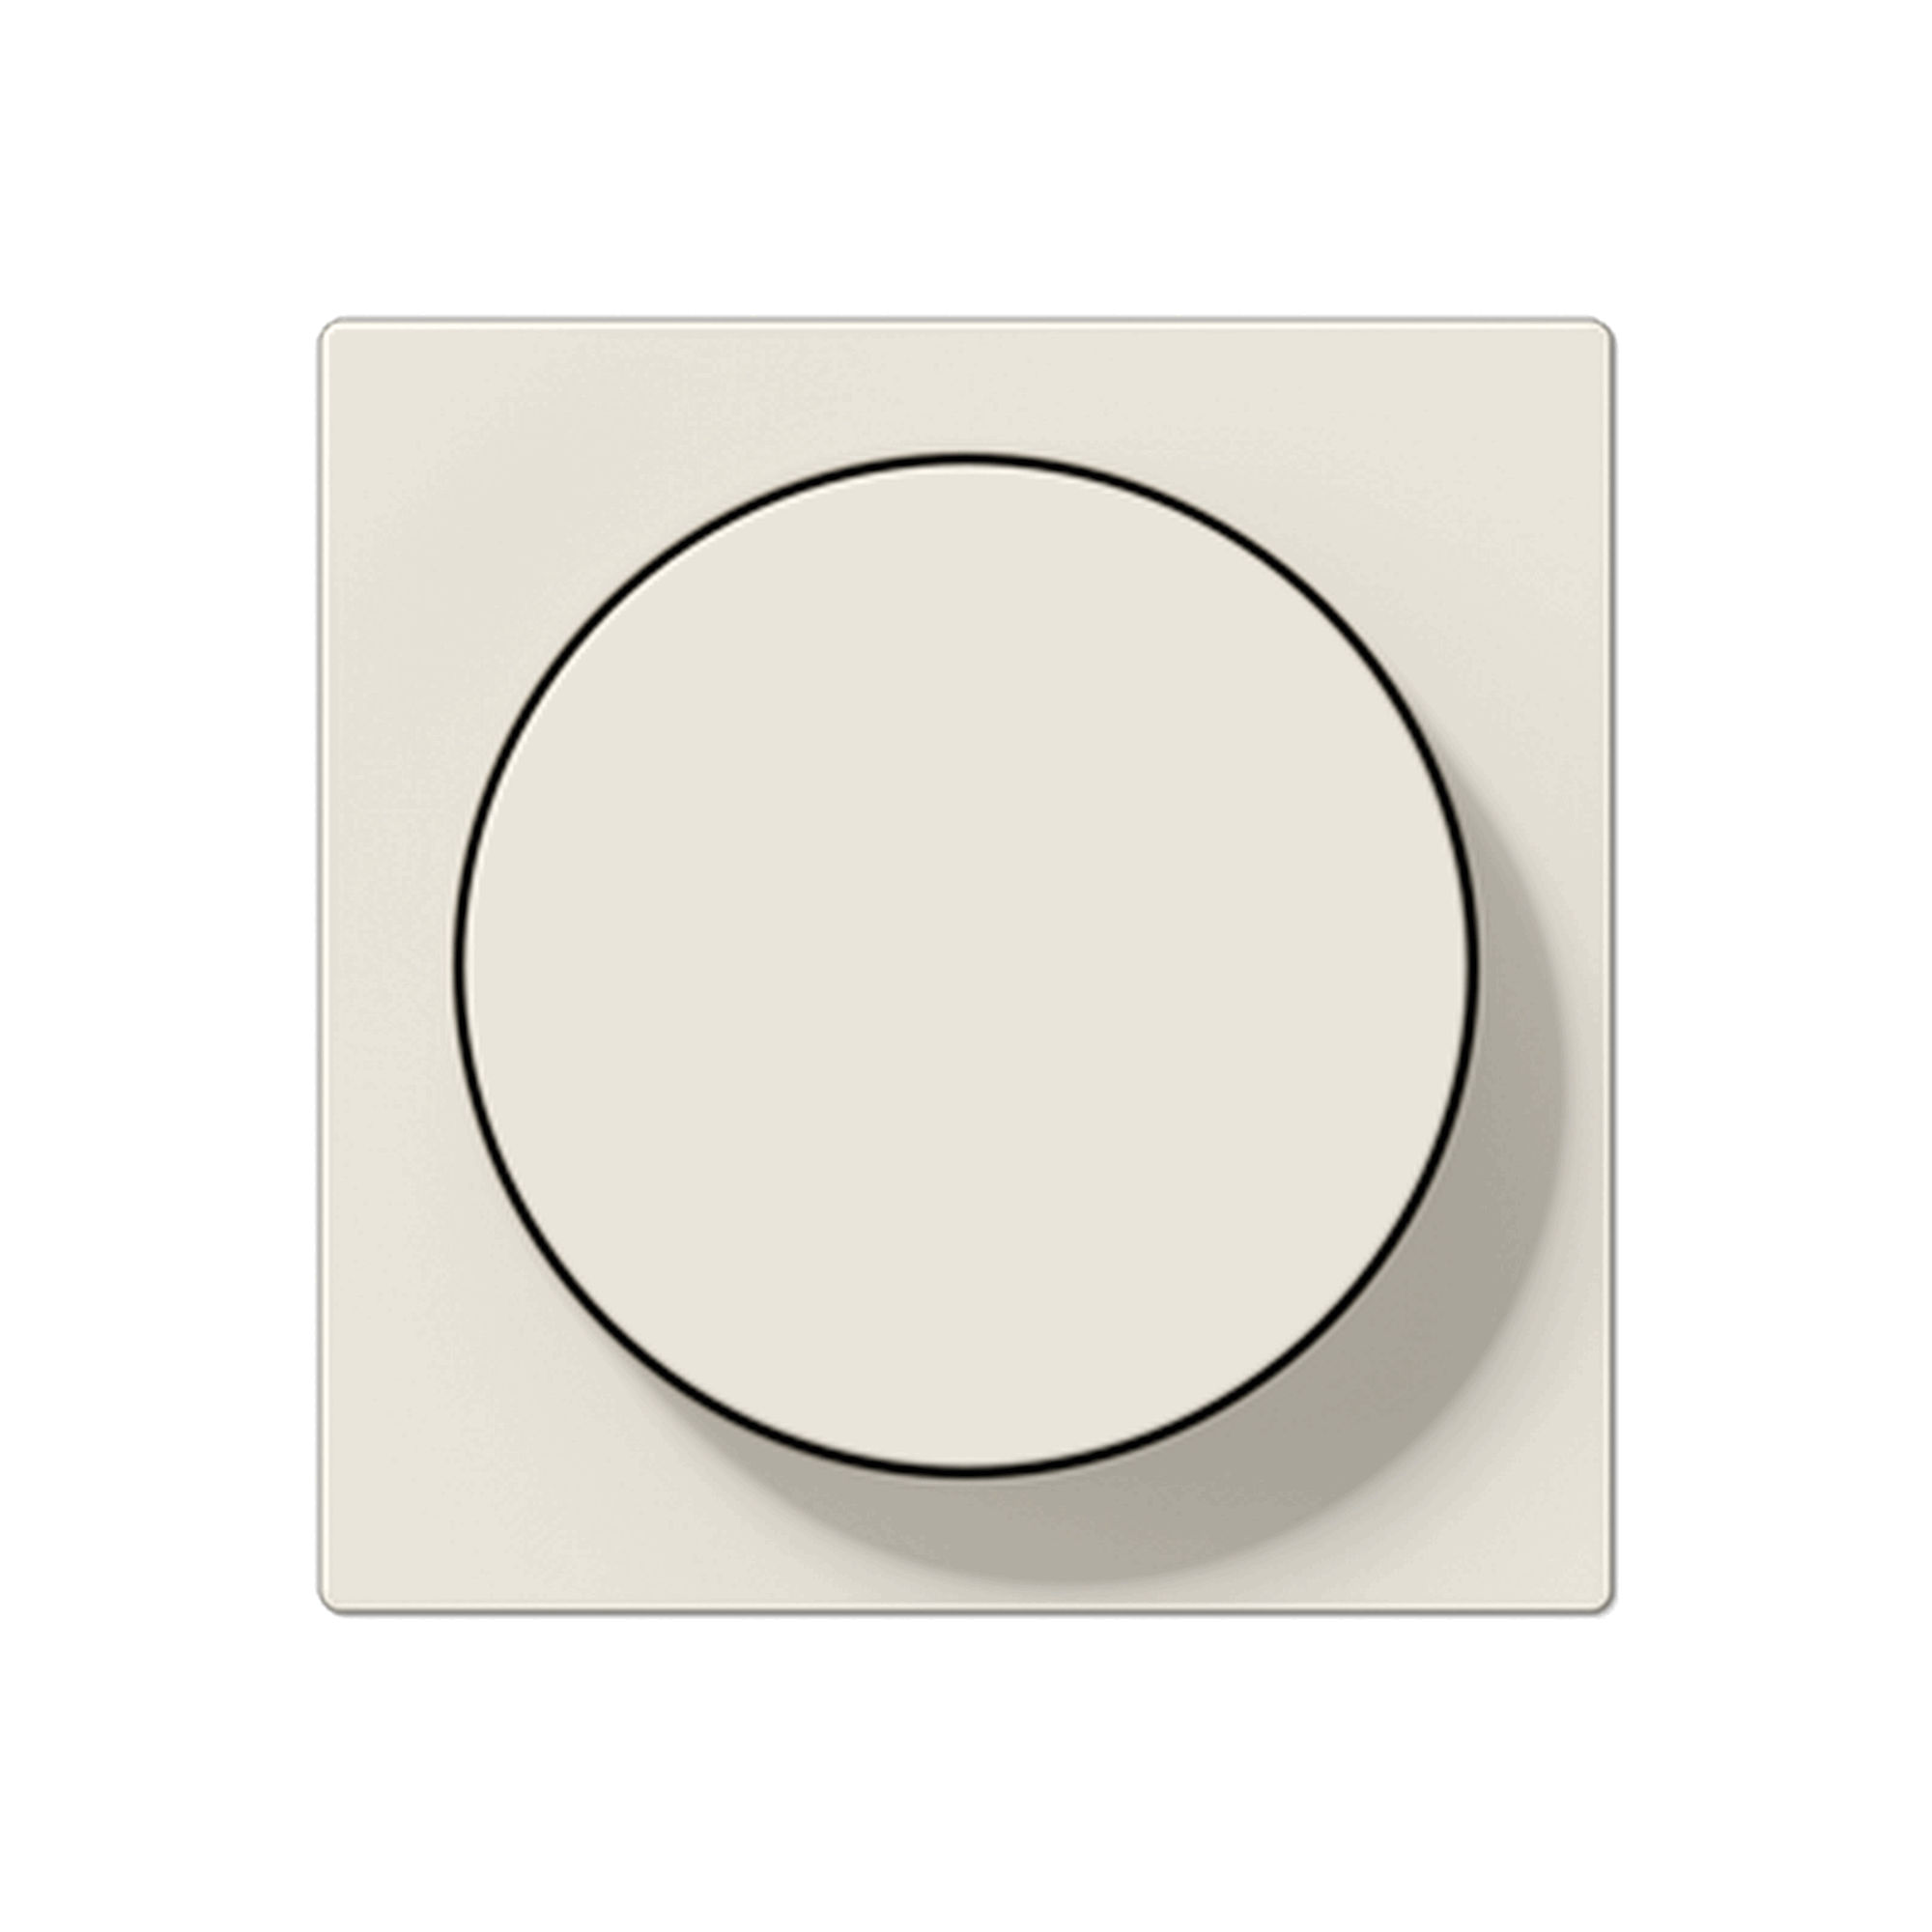 Dimmer-Abdeckung mit Drehknopf 'A' cremeweiß + product picture